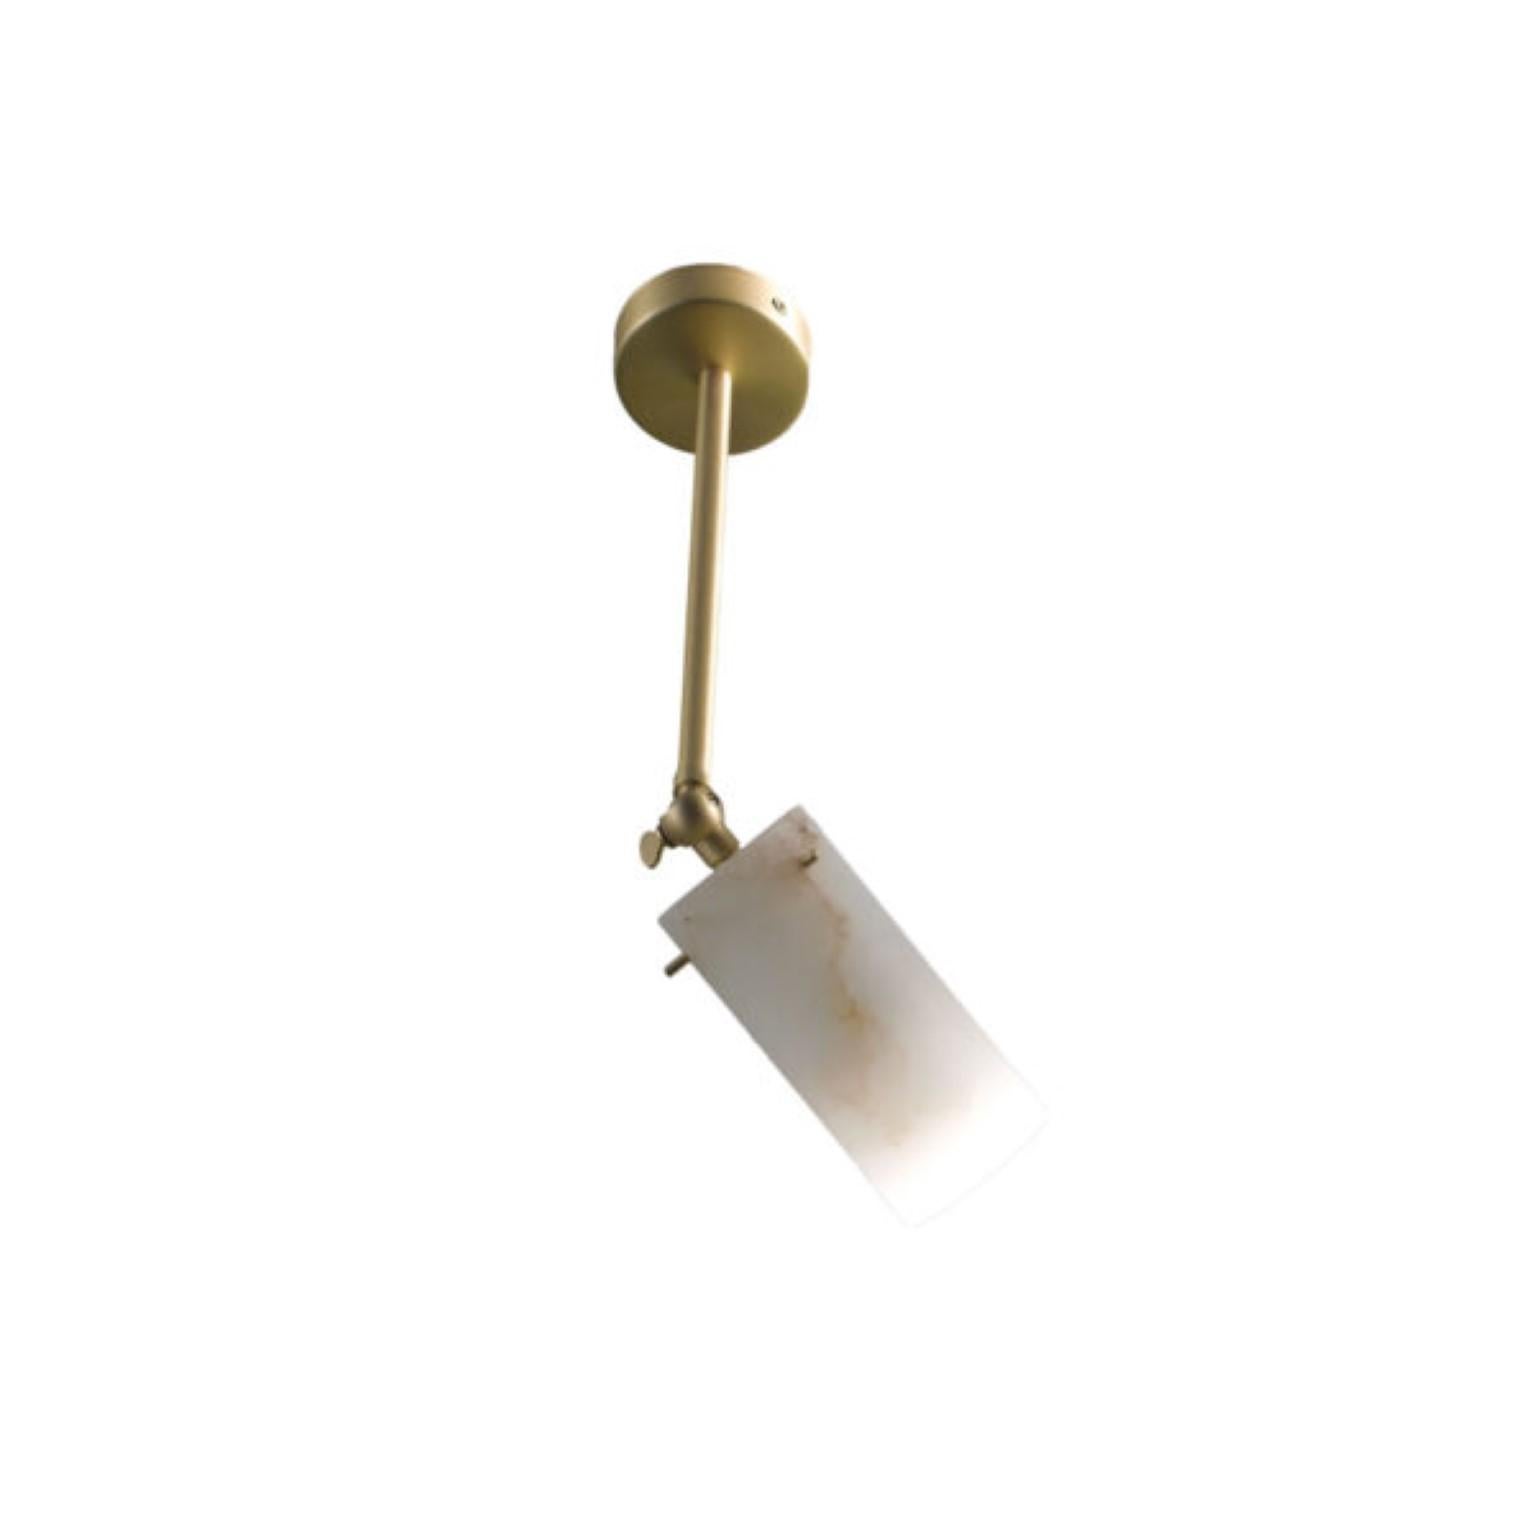 Spotlight poseidone Long #1 by Alabastro Italiano
Dimensions: W 8 x D 22 x H 15 cm
Materials: Italian white Alabaster, Brushed Brass
Other finishes available. Please contact us.
Light Source 1 x GU10 LED 6 Watt, Tot. 519 Lumen, 3000 k, 220 V

All